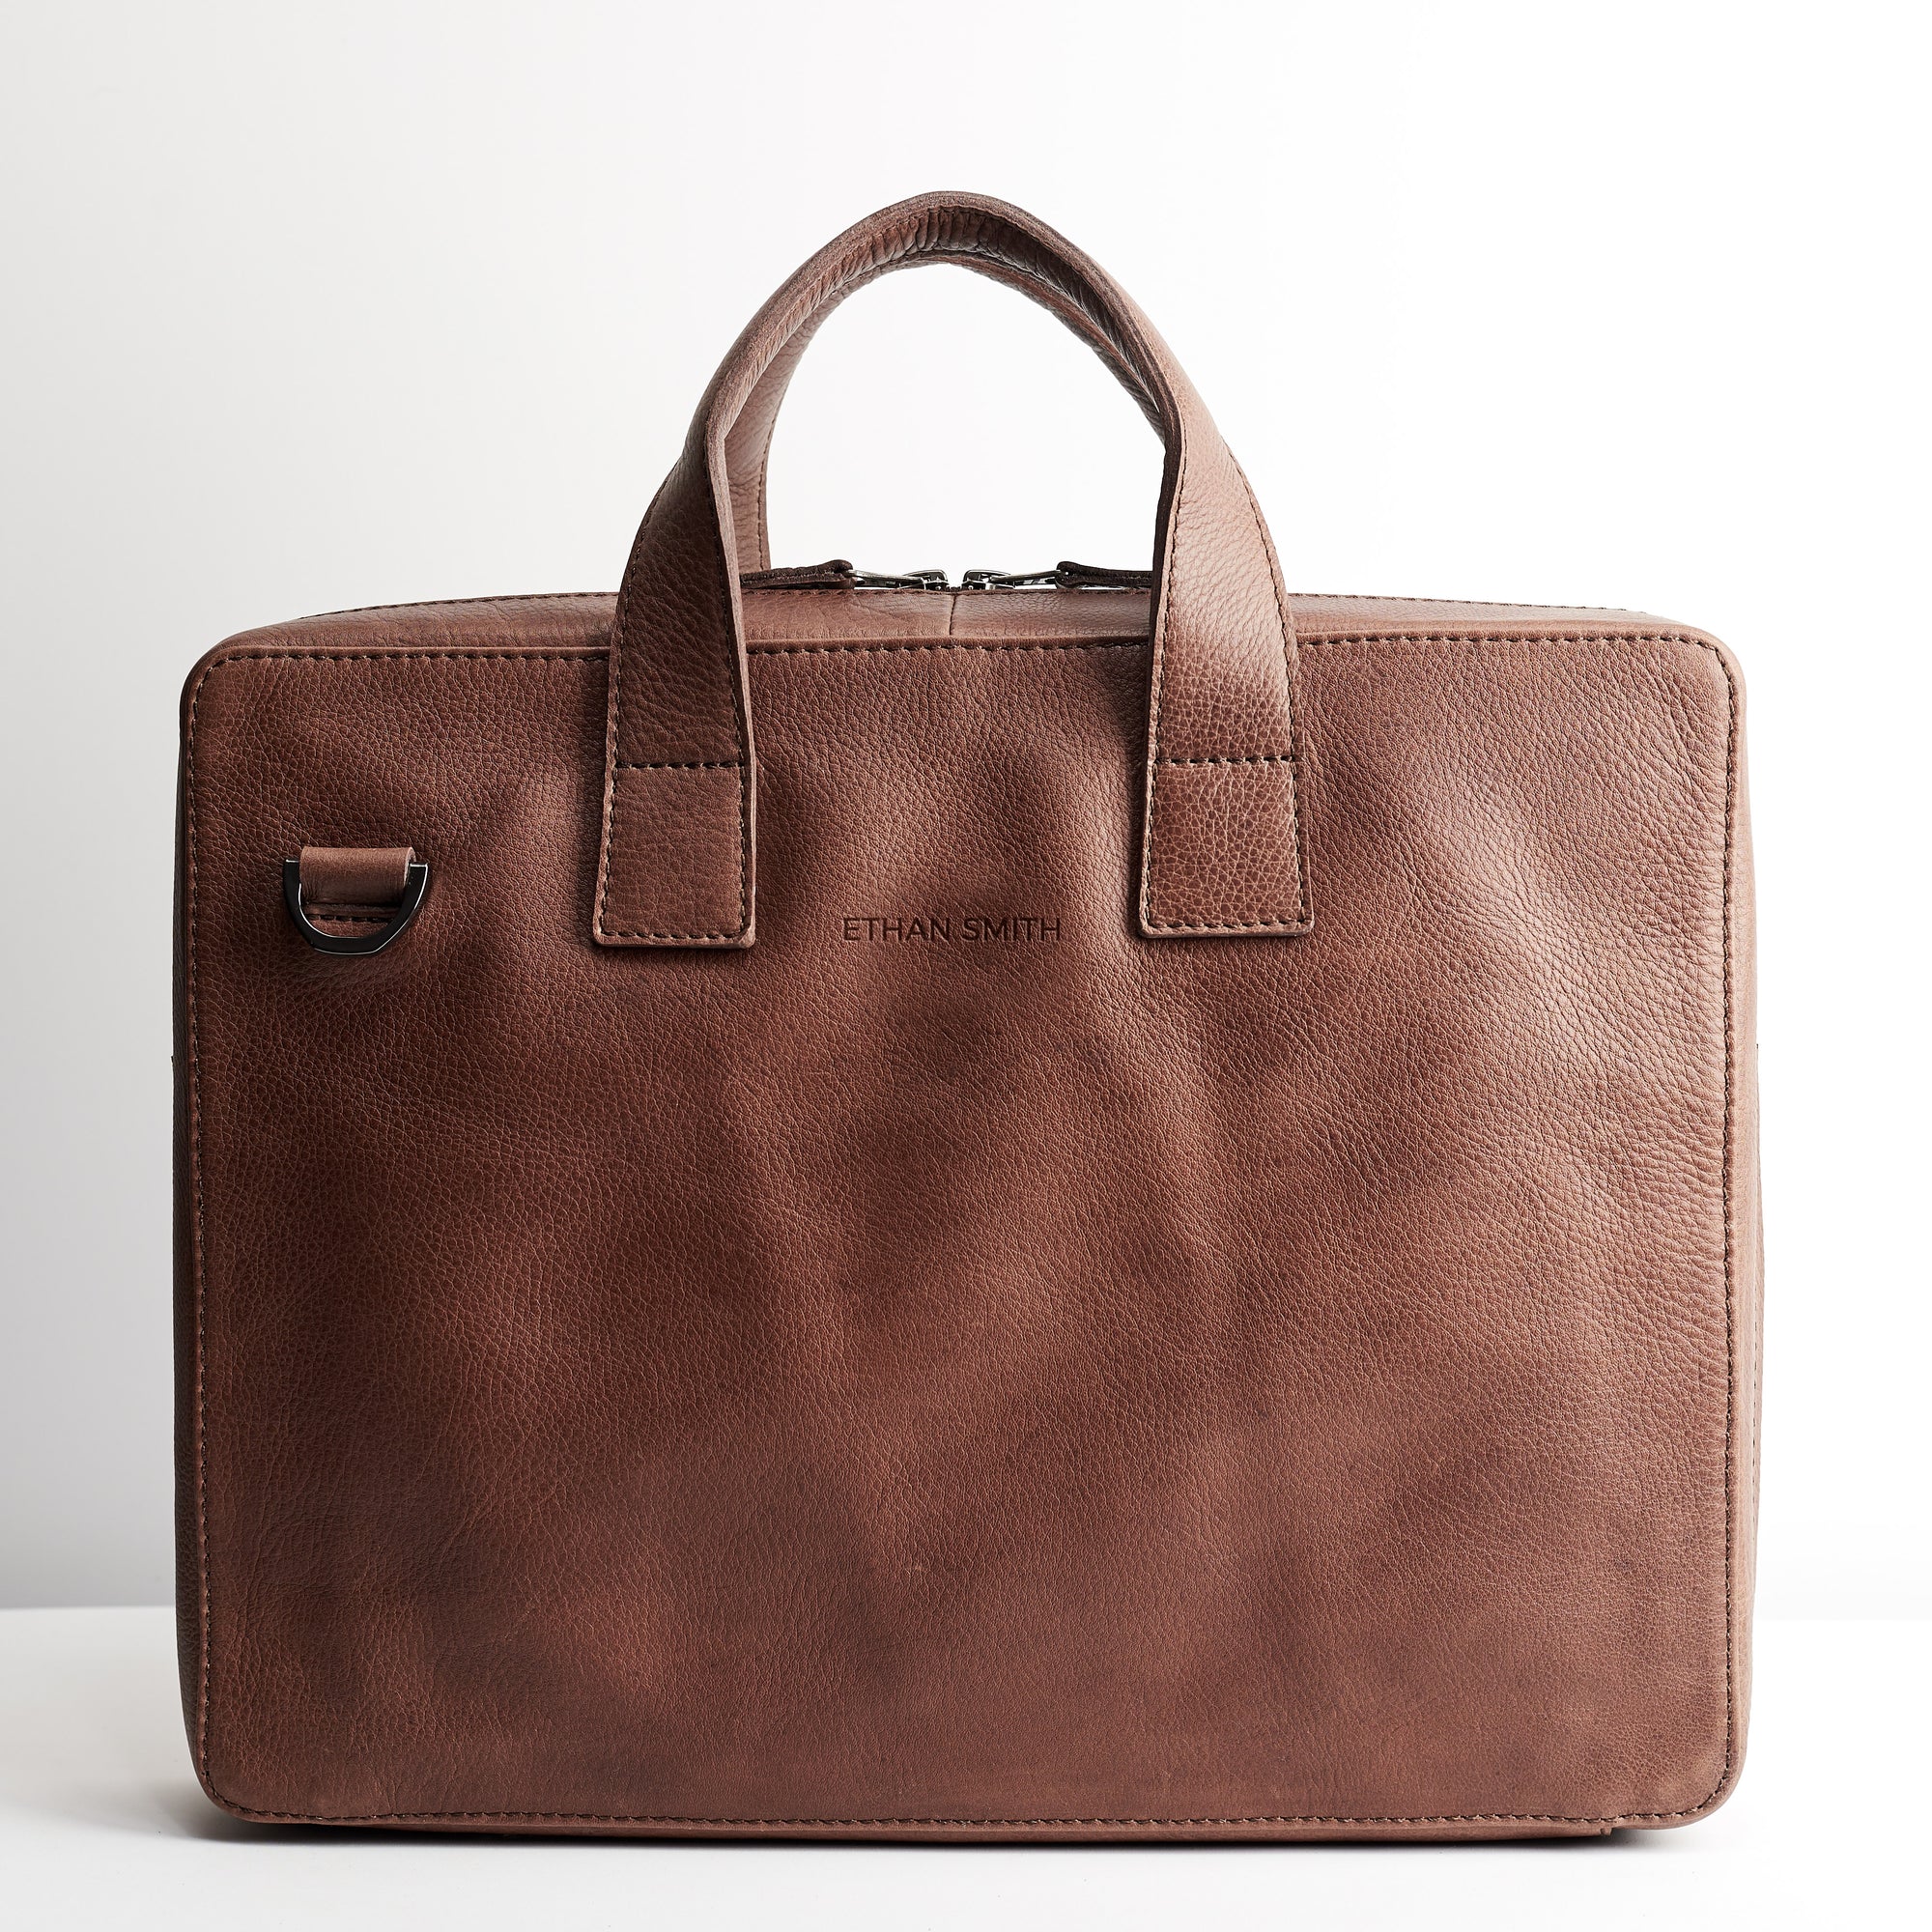 Personalized custom engraving detail. Brown leather soft briefcase for men. Handmade workbag